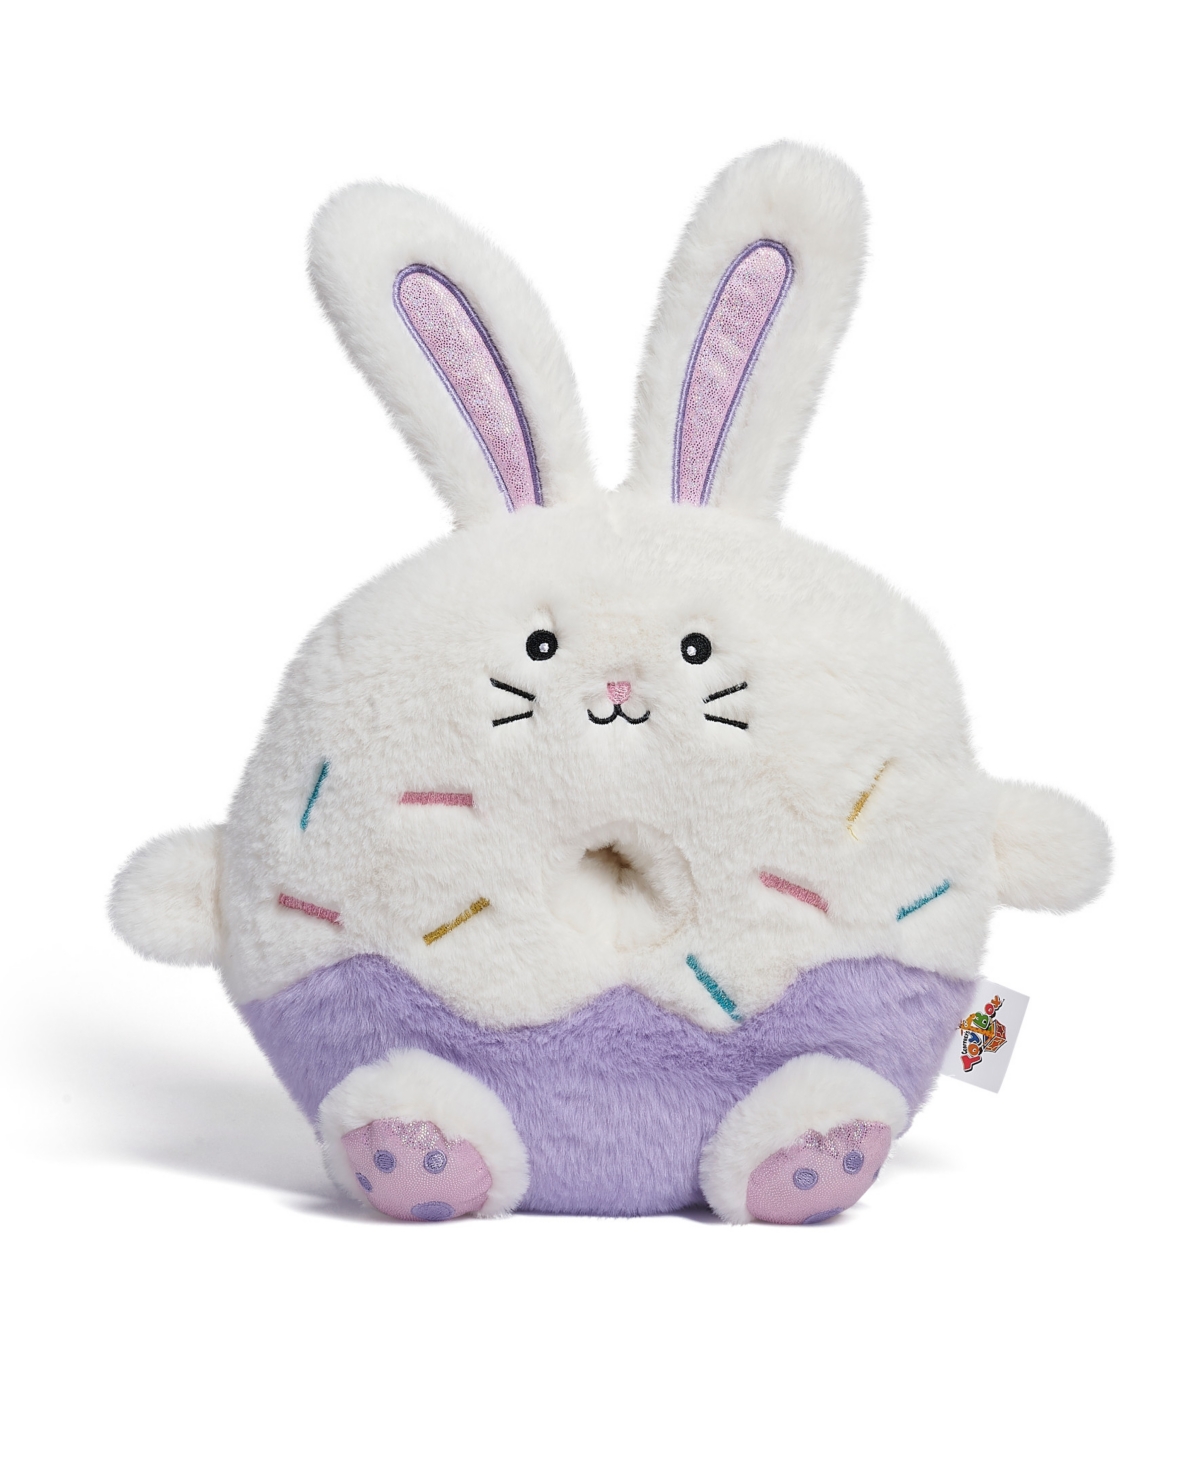 Geoffrey's Toy Box 10" Donut Bunny Plush Created By Toys "r" Us In White